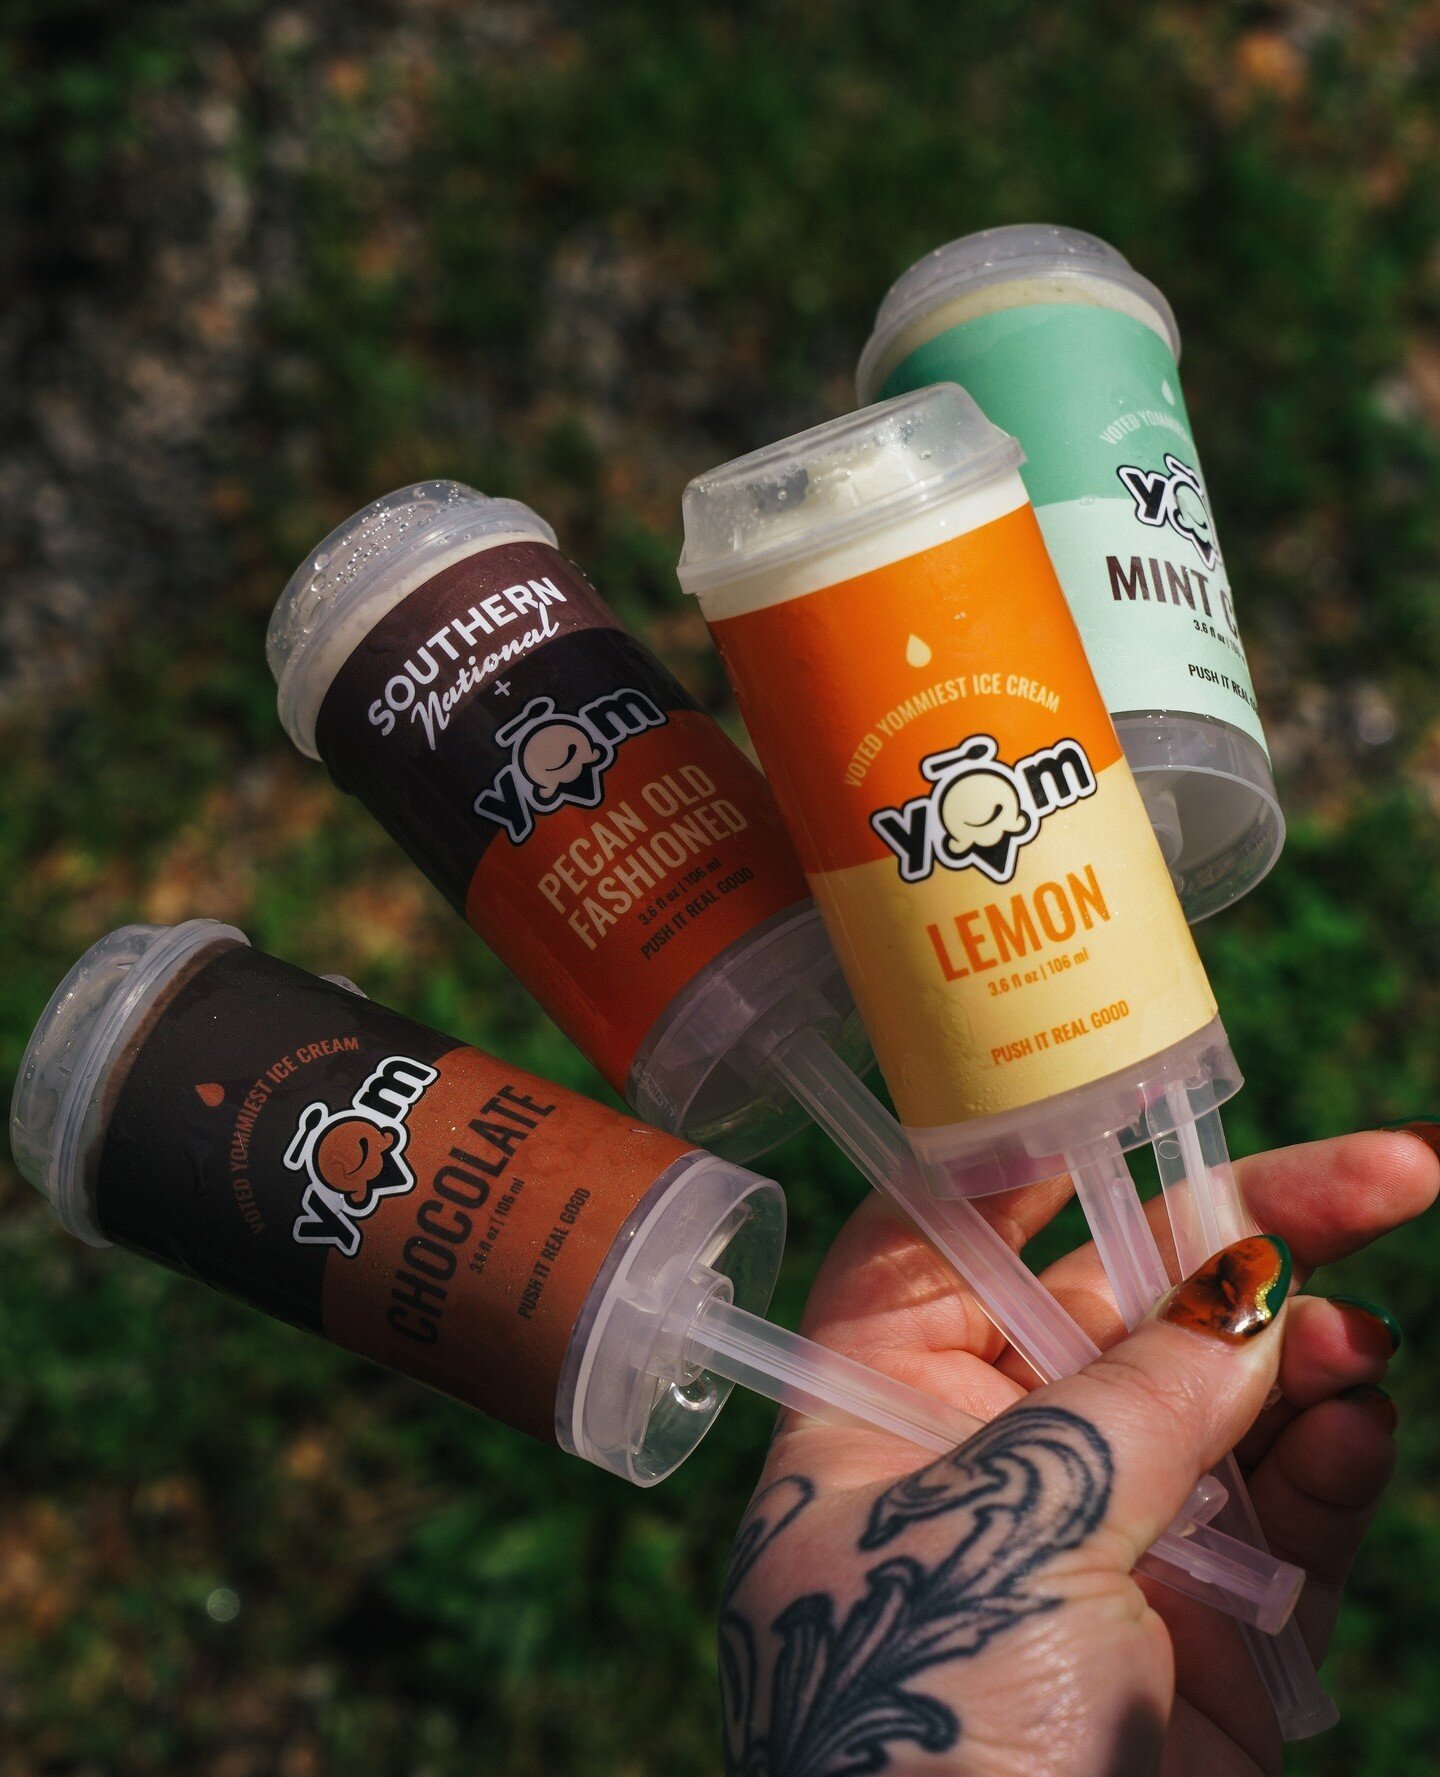 What's sweeter than beating the Spring &amp; Summer heat? Our NEW YOM Pops, locally made in Kirkwood and made with delicious custard - come on over and try 'em for yourself! #ComeHaveAPop #YomPops #KirkwoodCustard @yomicecream